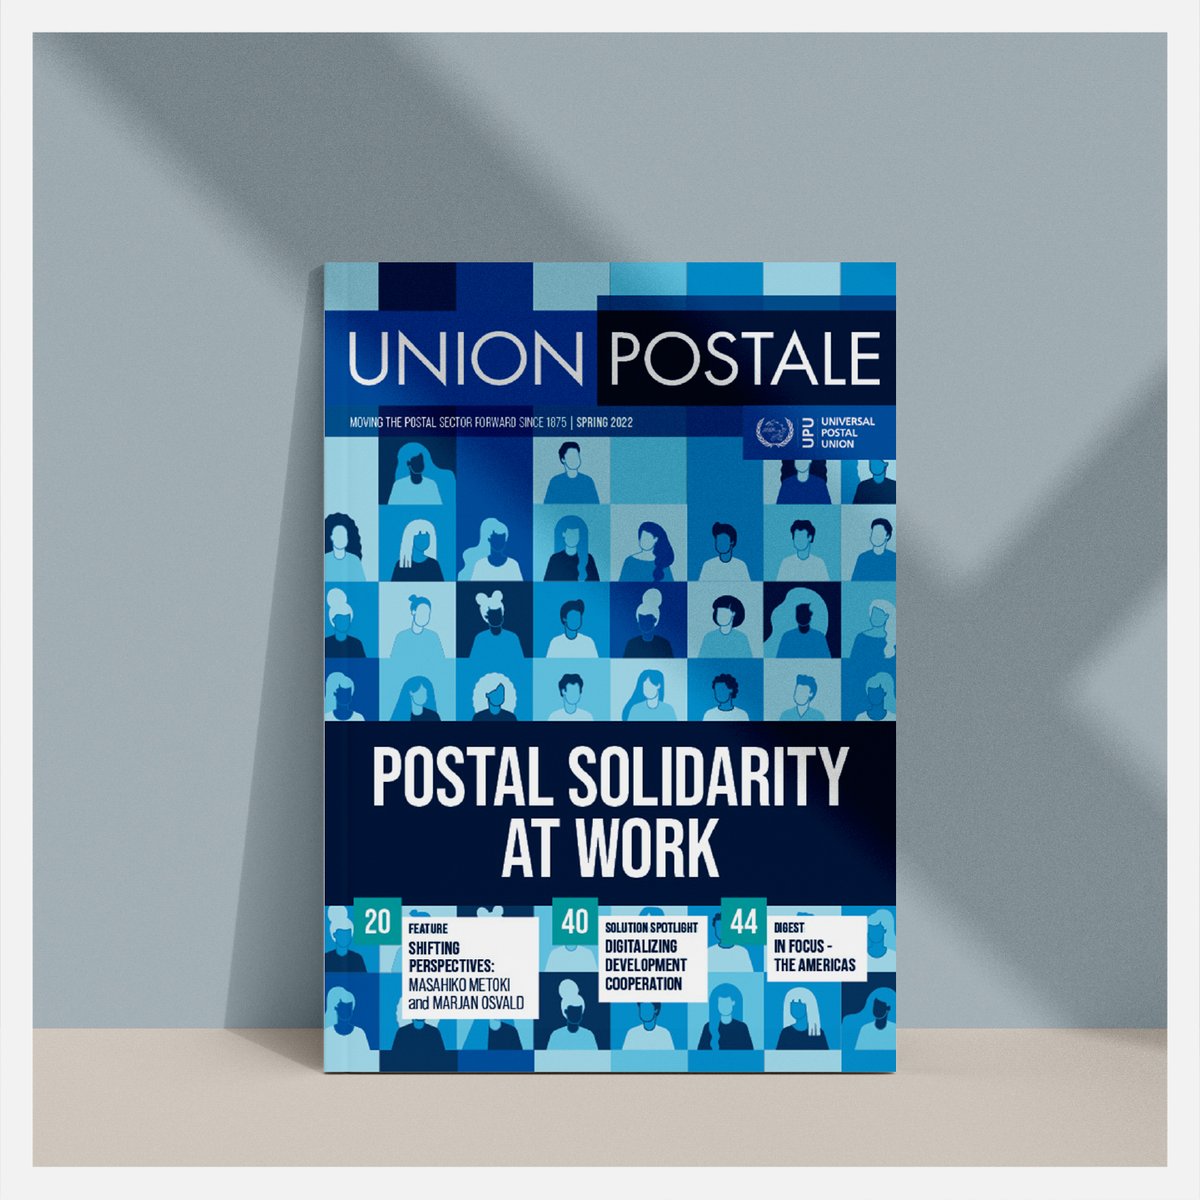 UPU's flagship magazine #UnionPostale was established in 1875 to provide UPU members with first-hand information on the #PostalSector developments.

The latest issue focuses on postal solidarity in action & is available to read online in English & French👉 bit.ly/3RpmedF